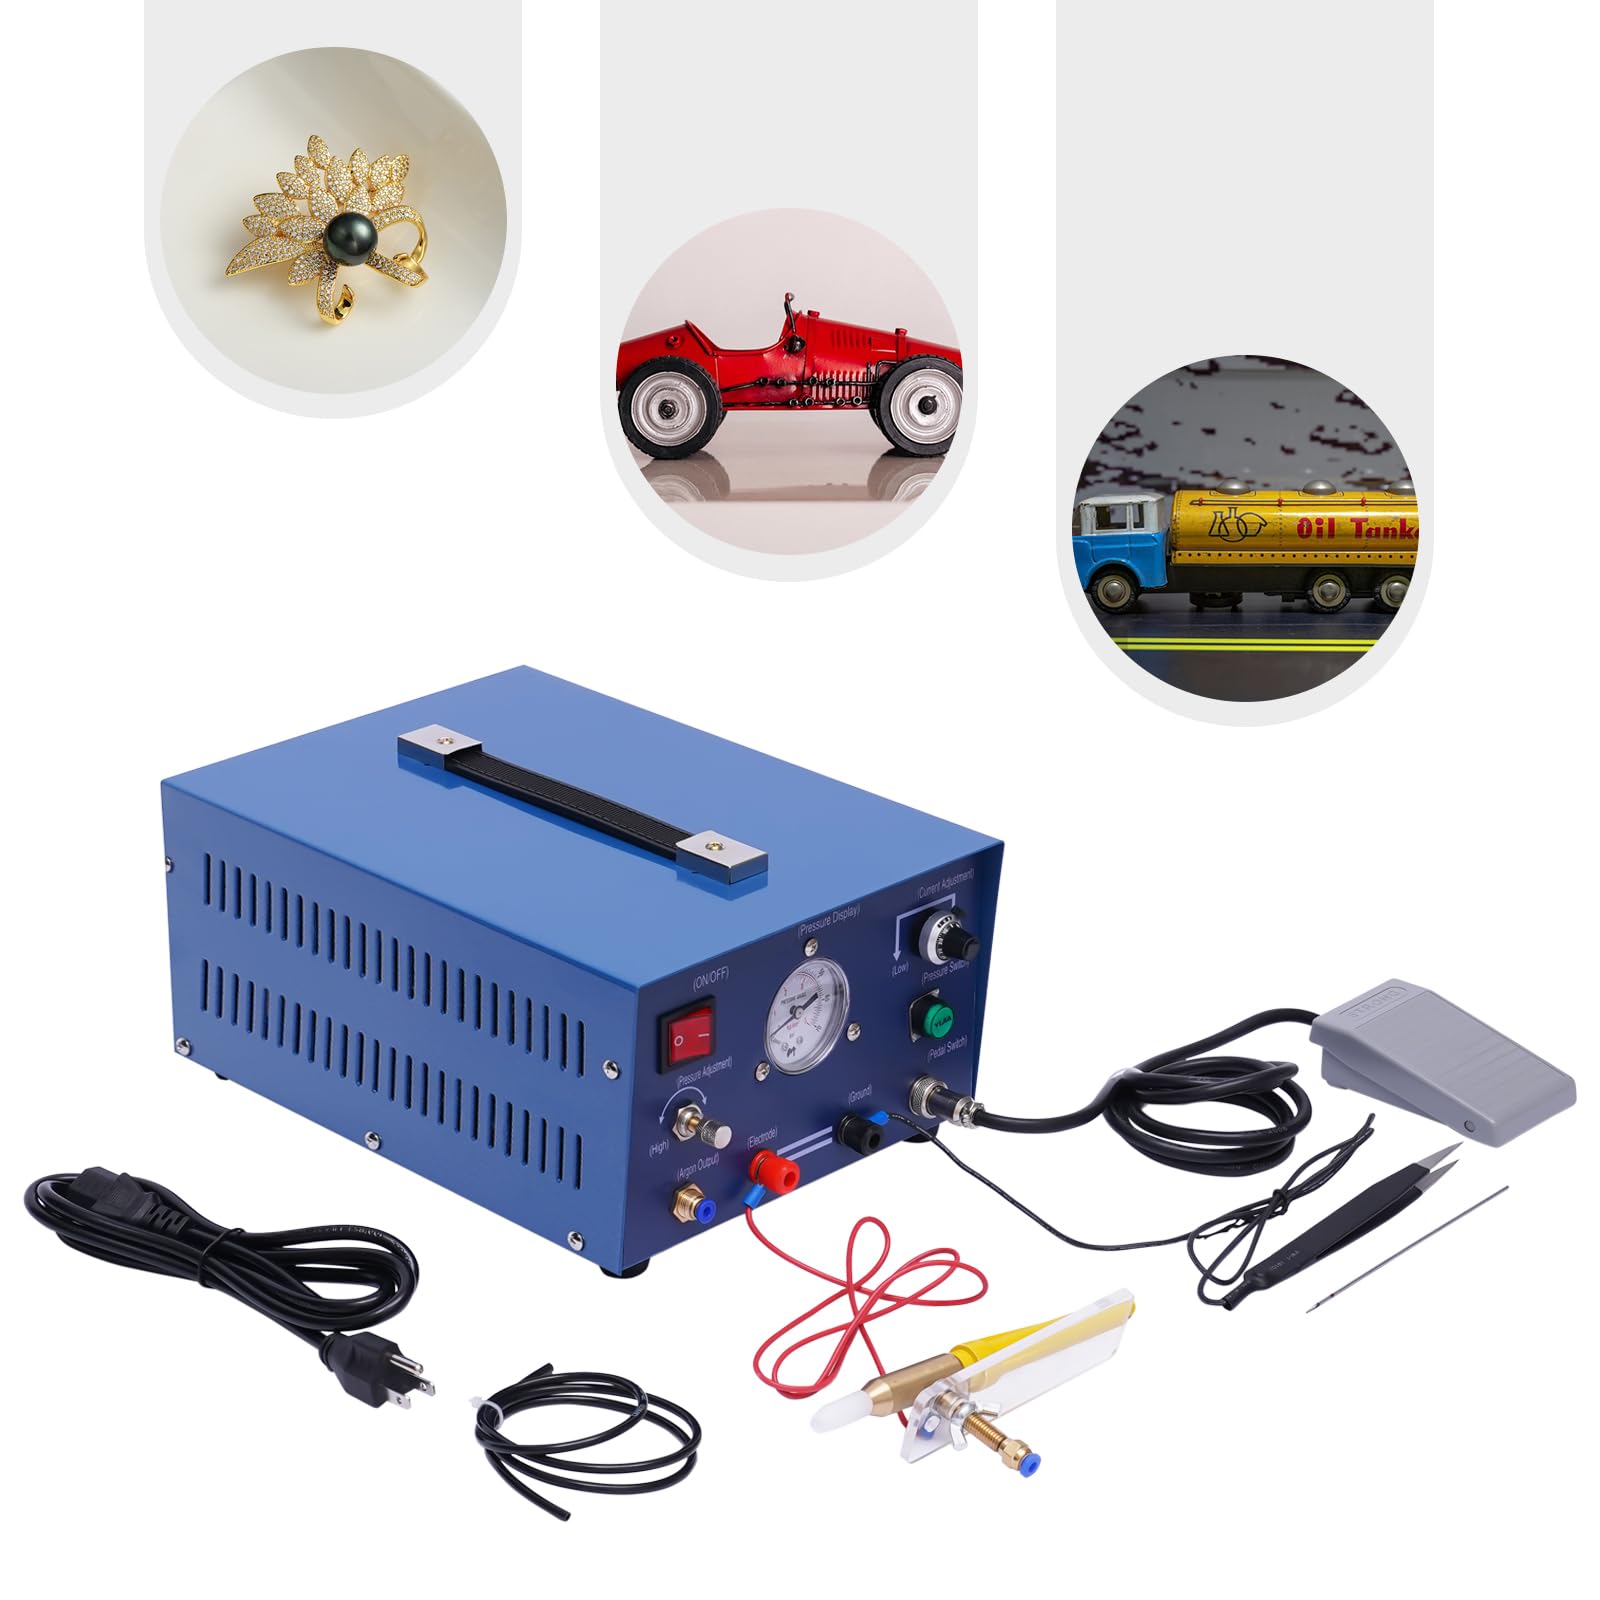 Eapmic Jewelry Spot Welding Machine Jewelry Pulse Argon Spot Welder 110V 800W 0.5-80A Portable Pulse Sparkle Jewelry Welder for Gold Silver Platinum with Foot Pedal